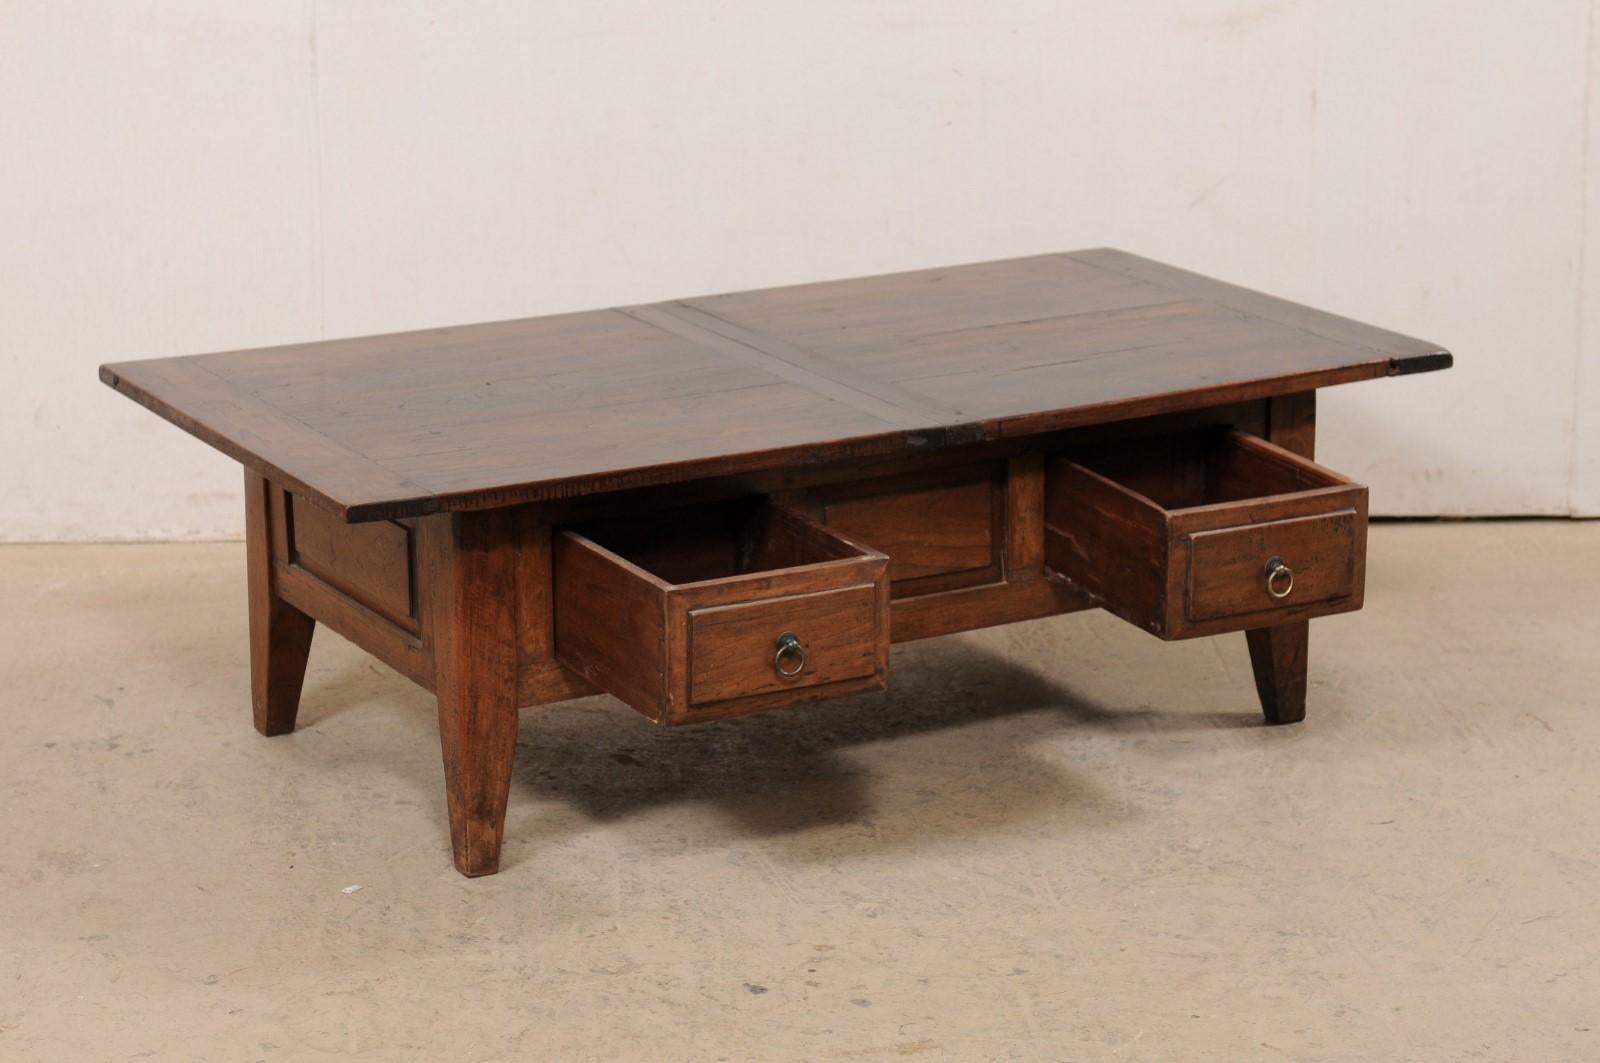 Wood French Fruitwood Coffee Table in Rectangular-Shape w/Storage, Early 20th Century For Sale